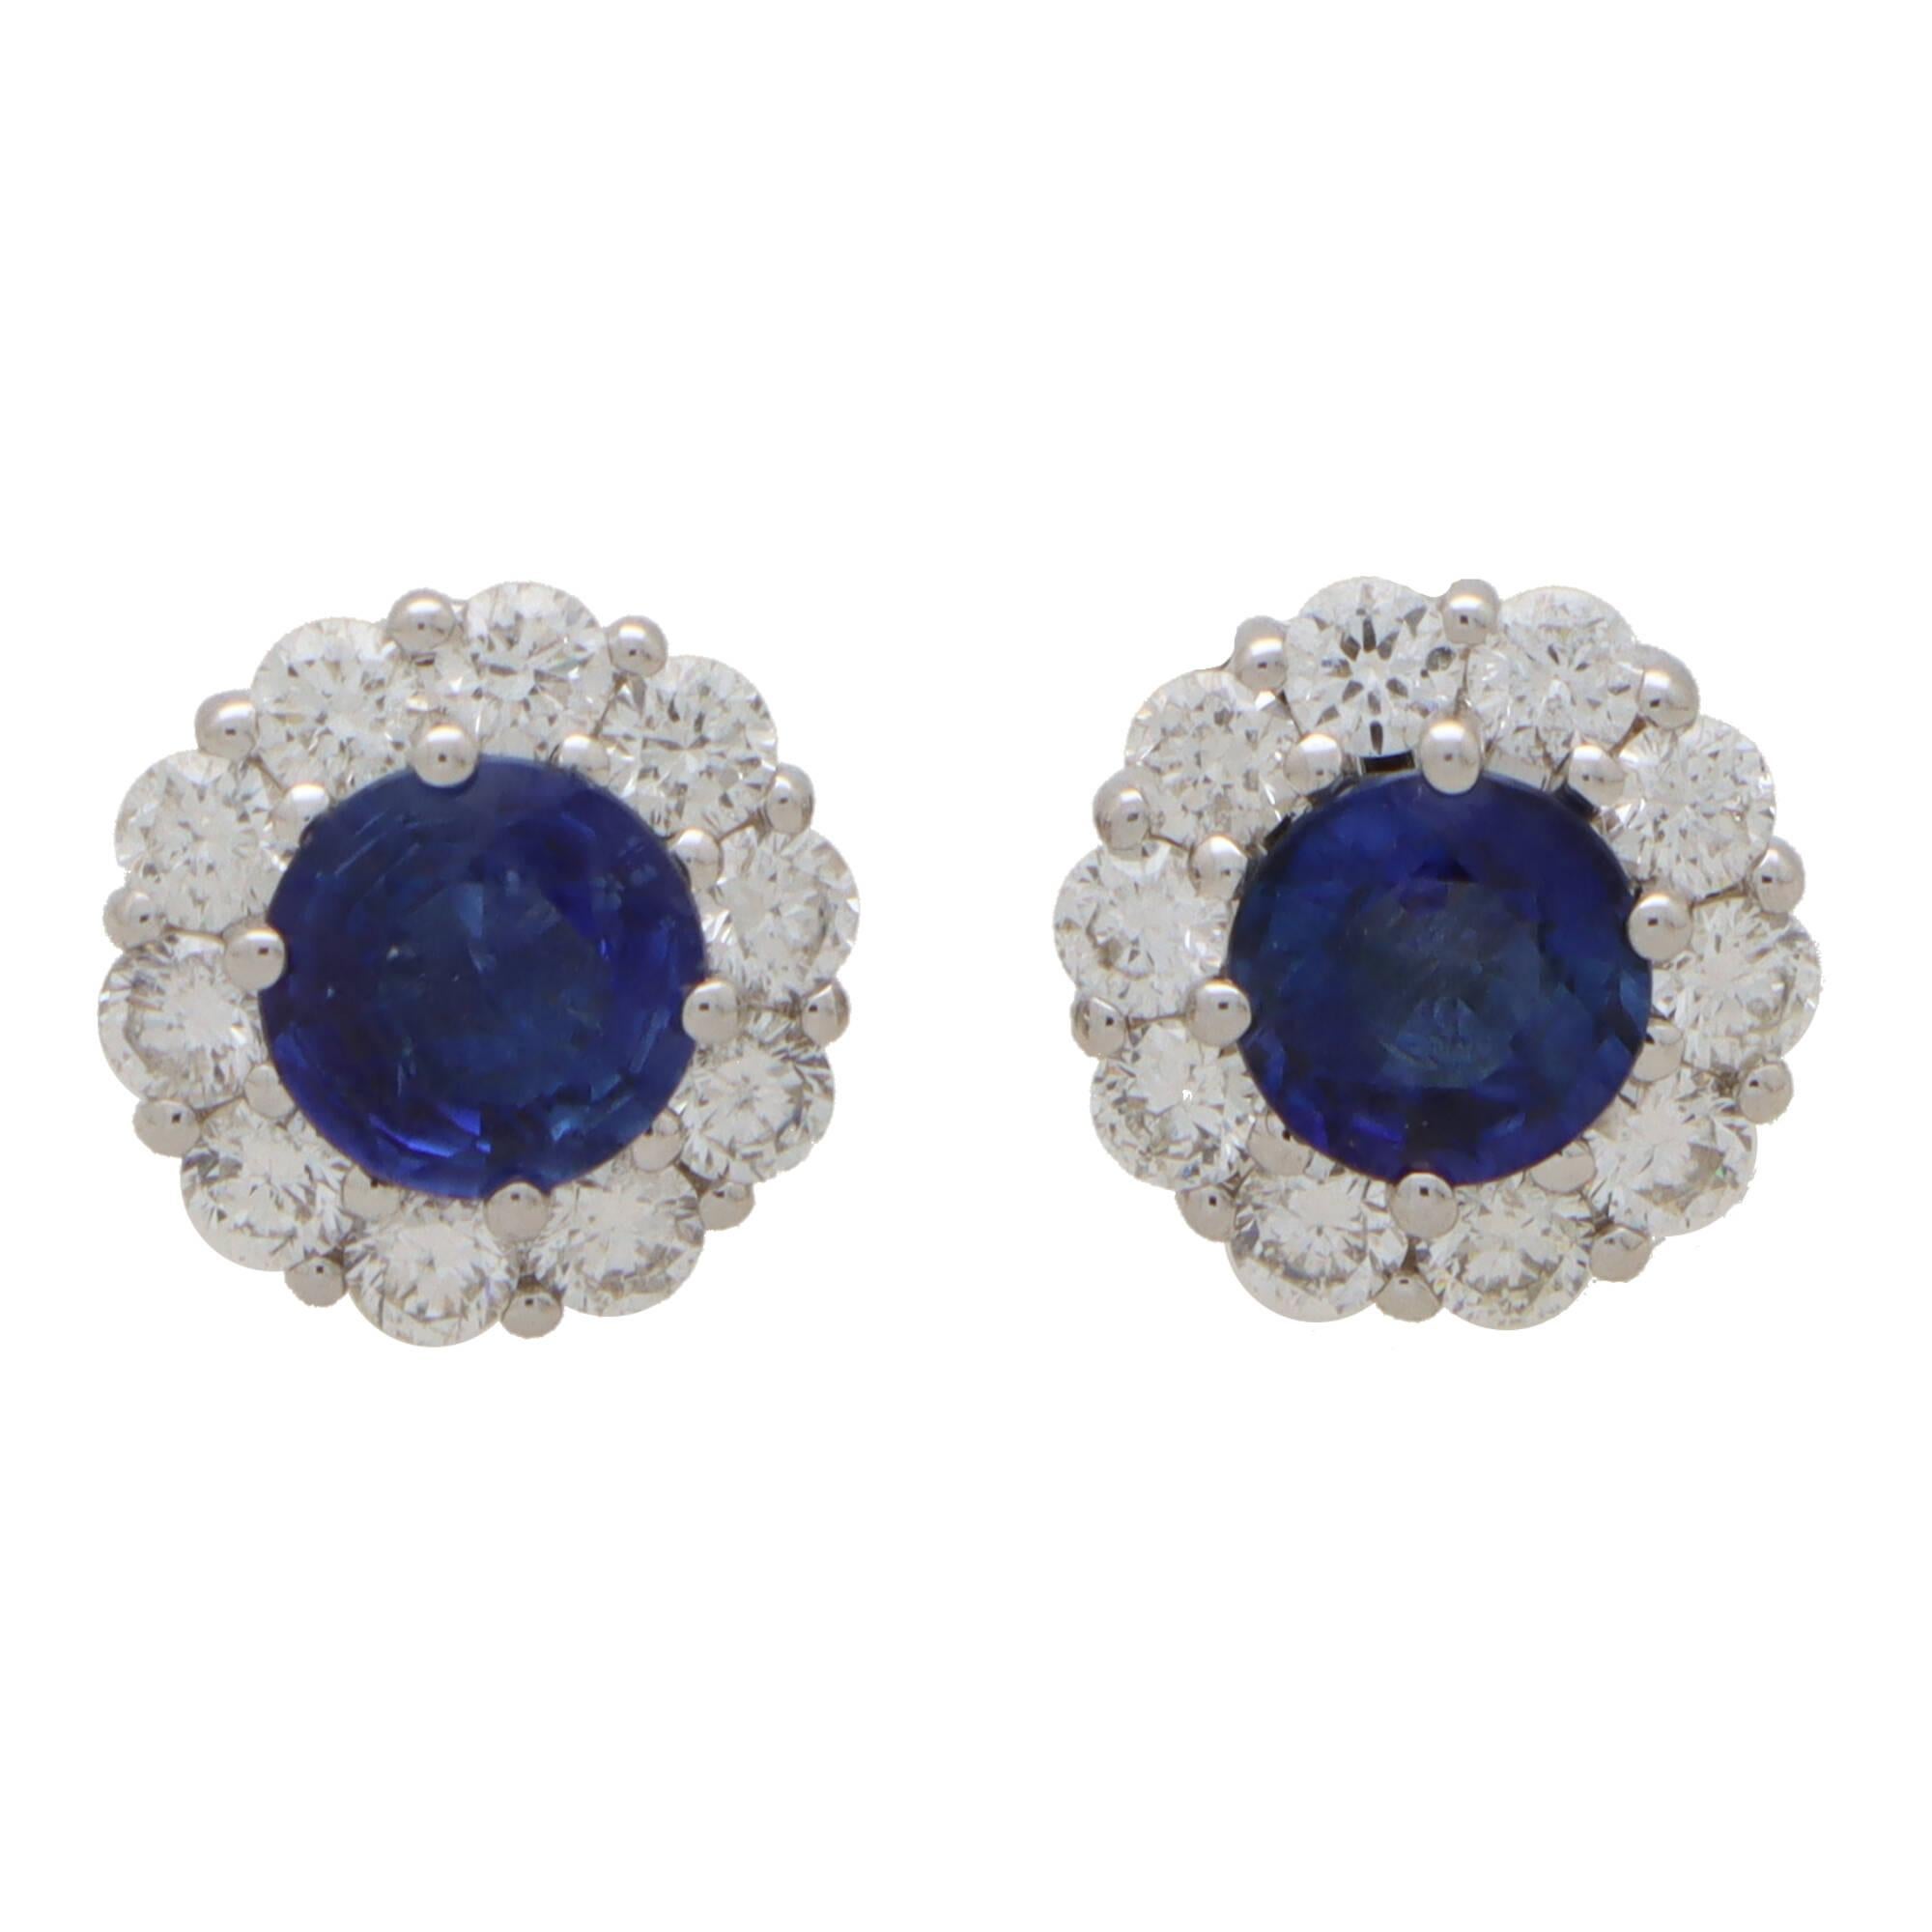 An elegant pair of blue sapphire and diamond cluster stud earrings set in 18k white gold.

Each earring depicts a floral cluster motif centrally set with a deep vibrant blue sapphire and surrounded by 10 round brilliant cut diamonds. The earrings